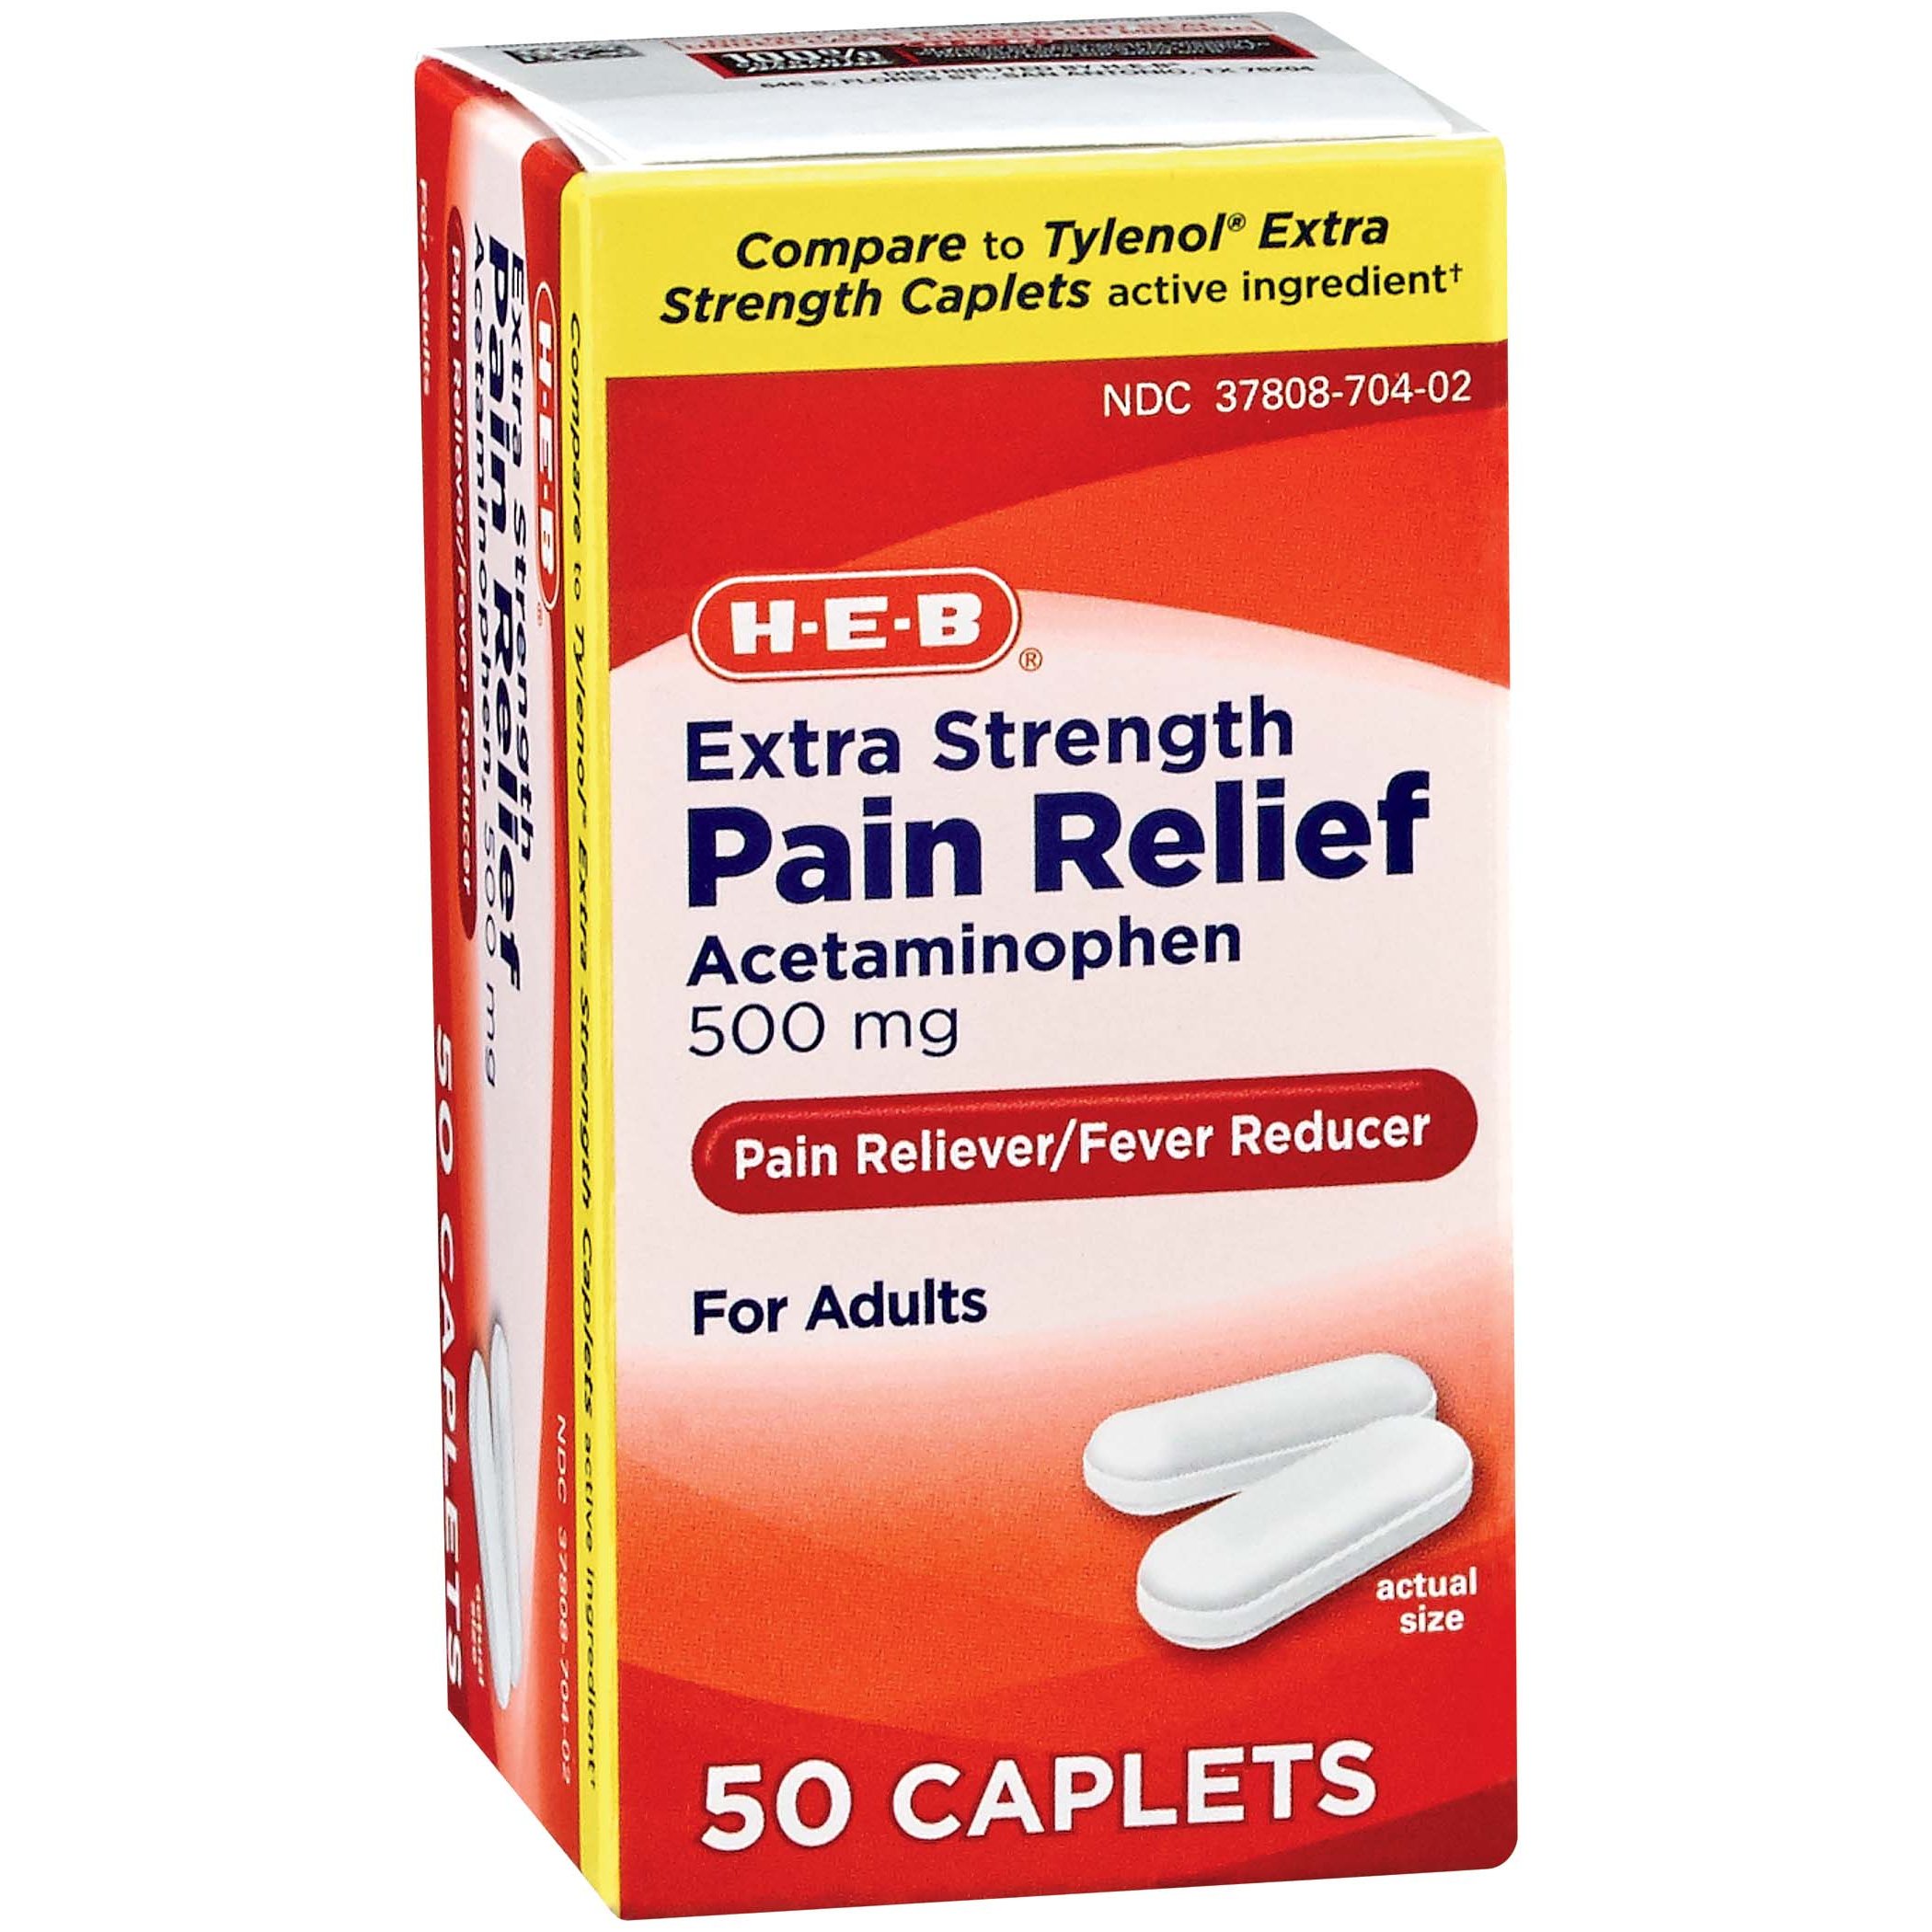 pain relievers